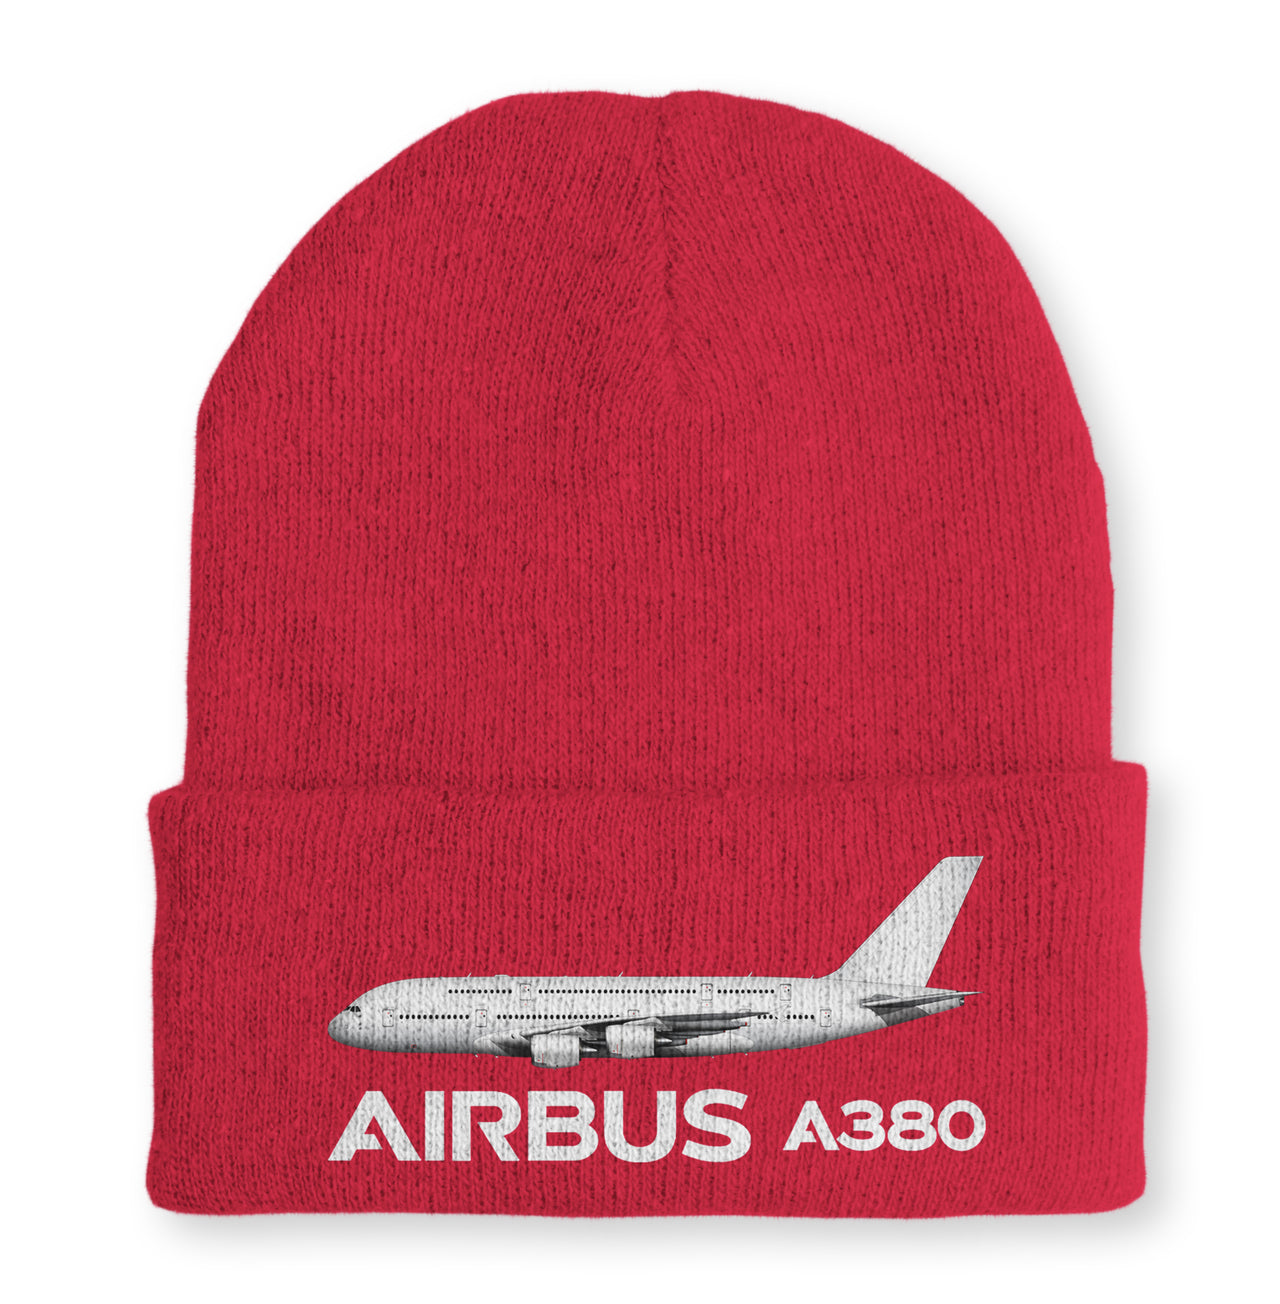 The Airbus A380 Embroidered Beanies